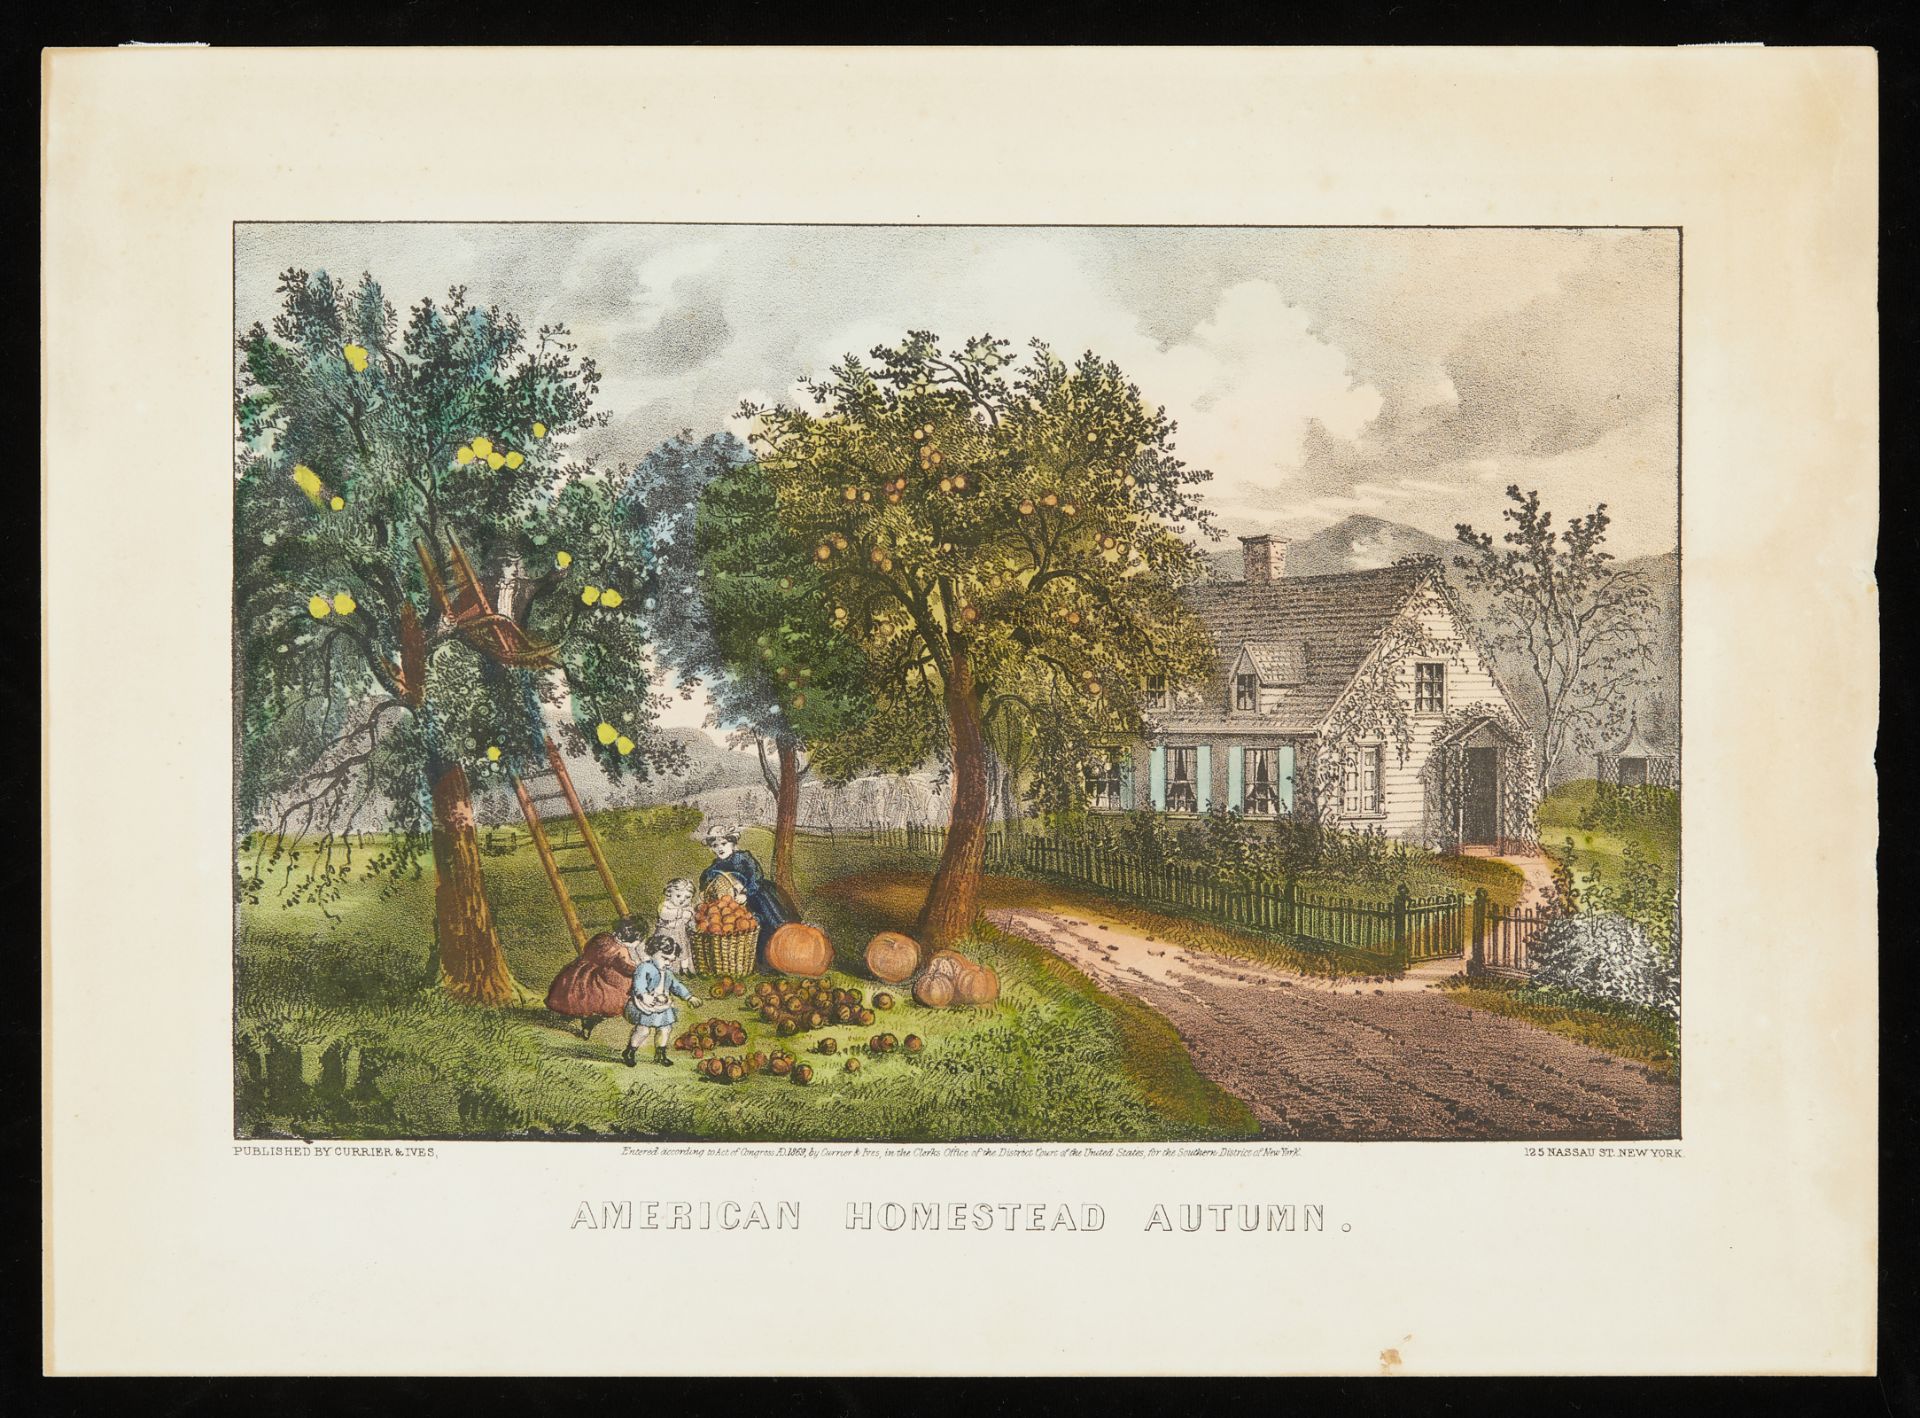 Currier & Ives "American Homestead Autumn" 1869 - Image 3 of 8